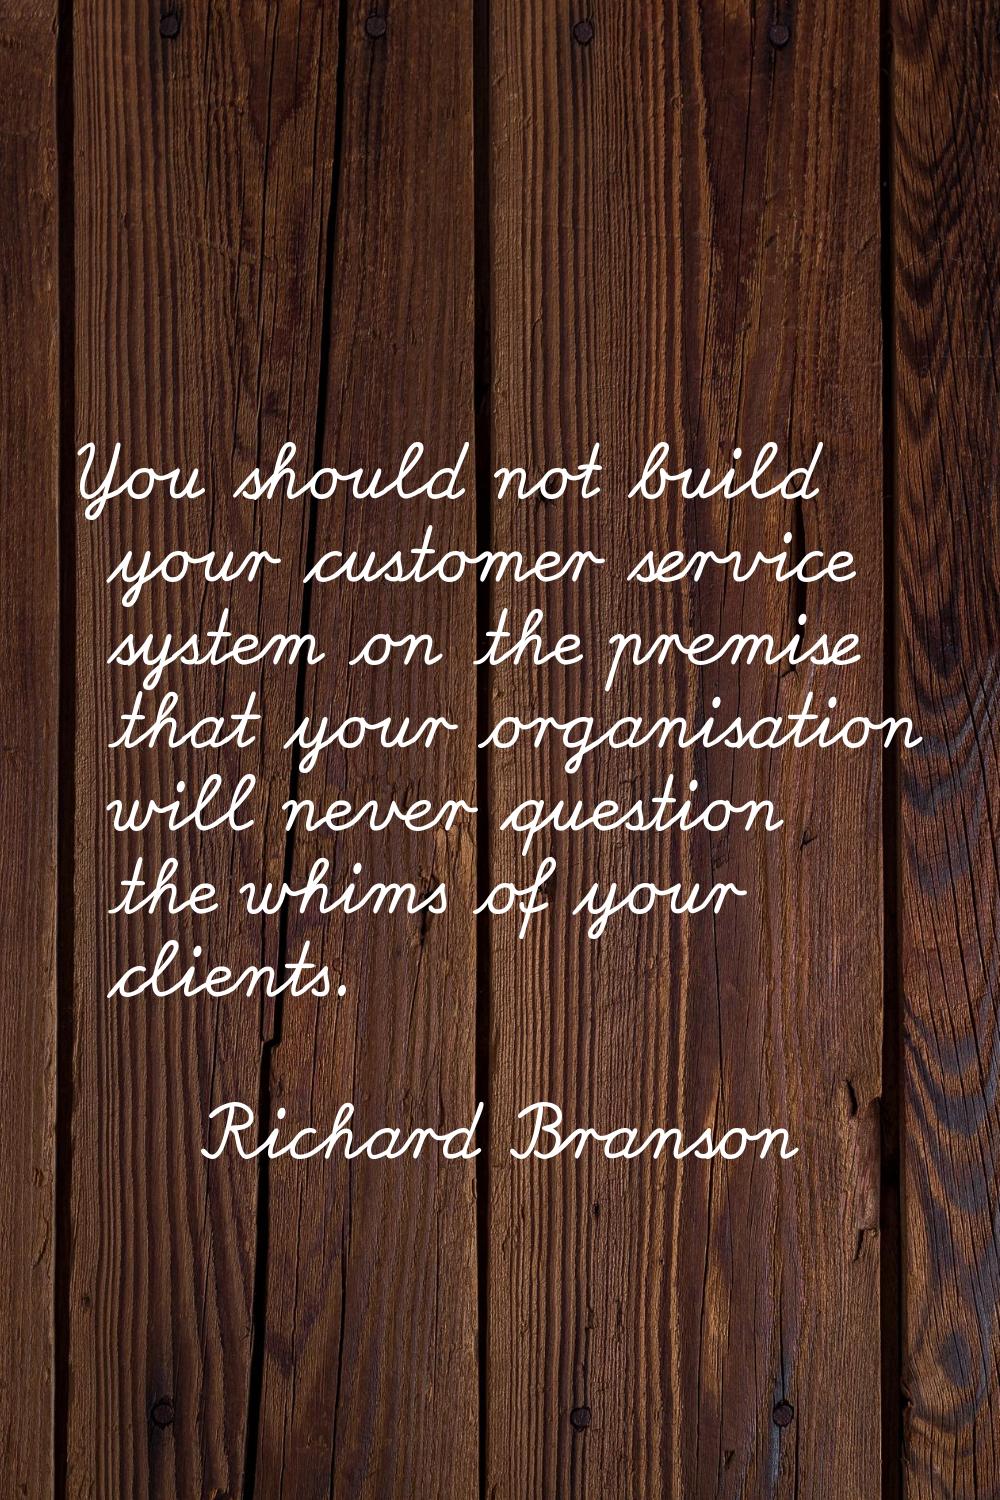 You should not build your customer service system on the premise that your organisation will never 